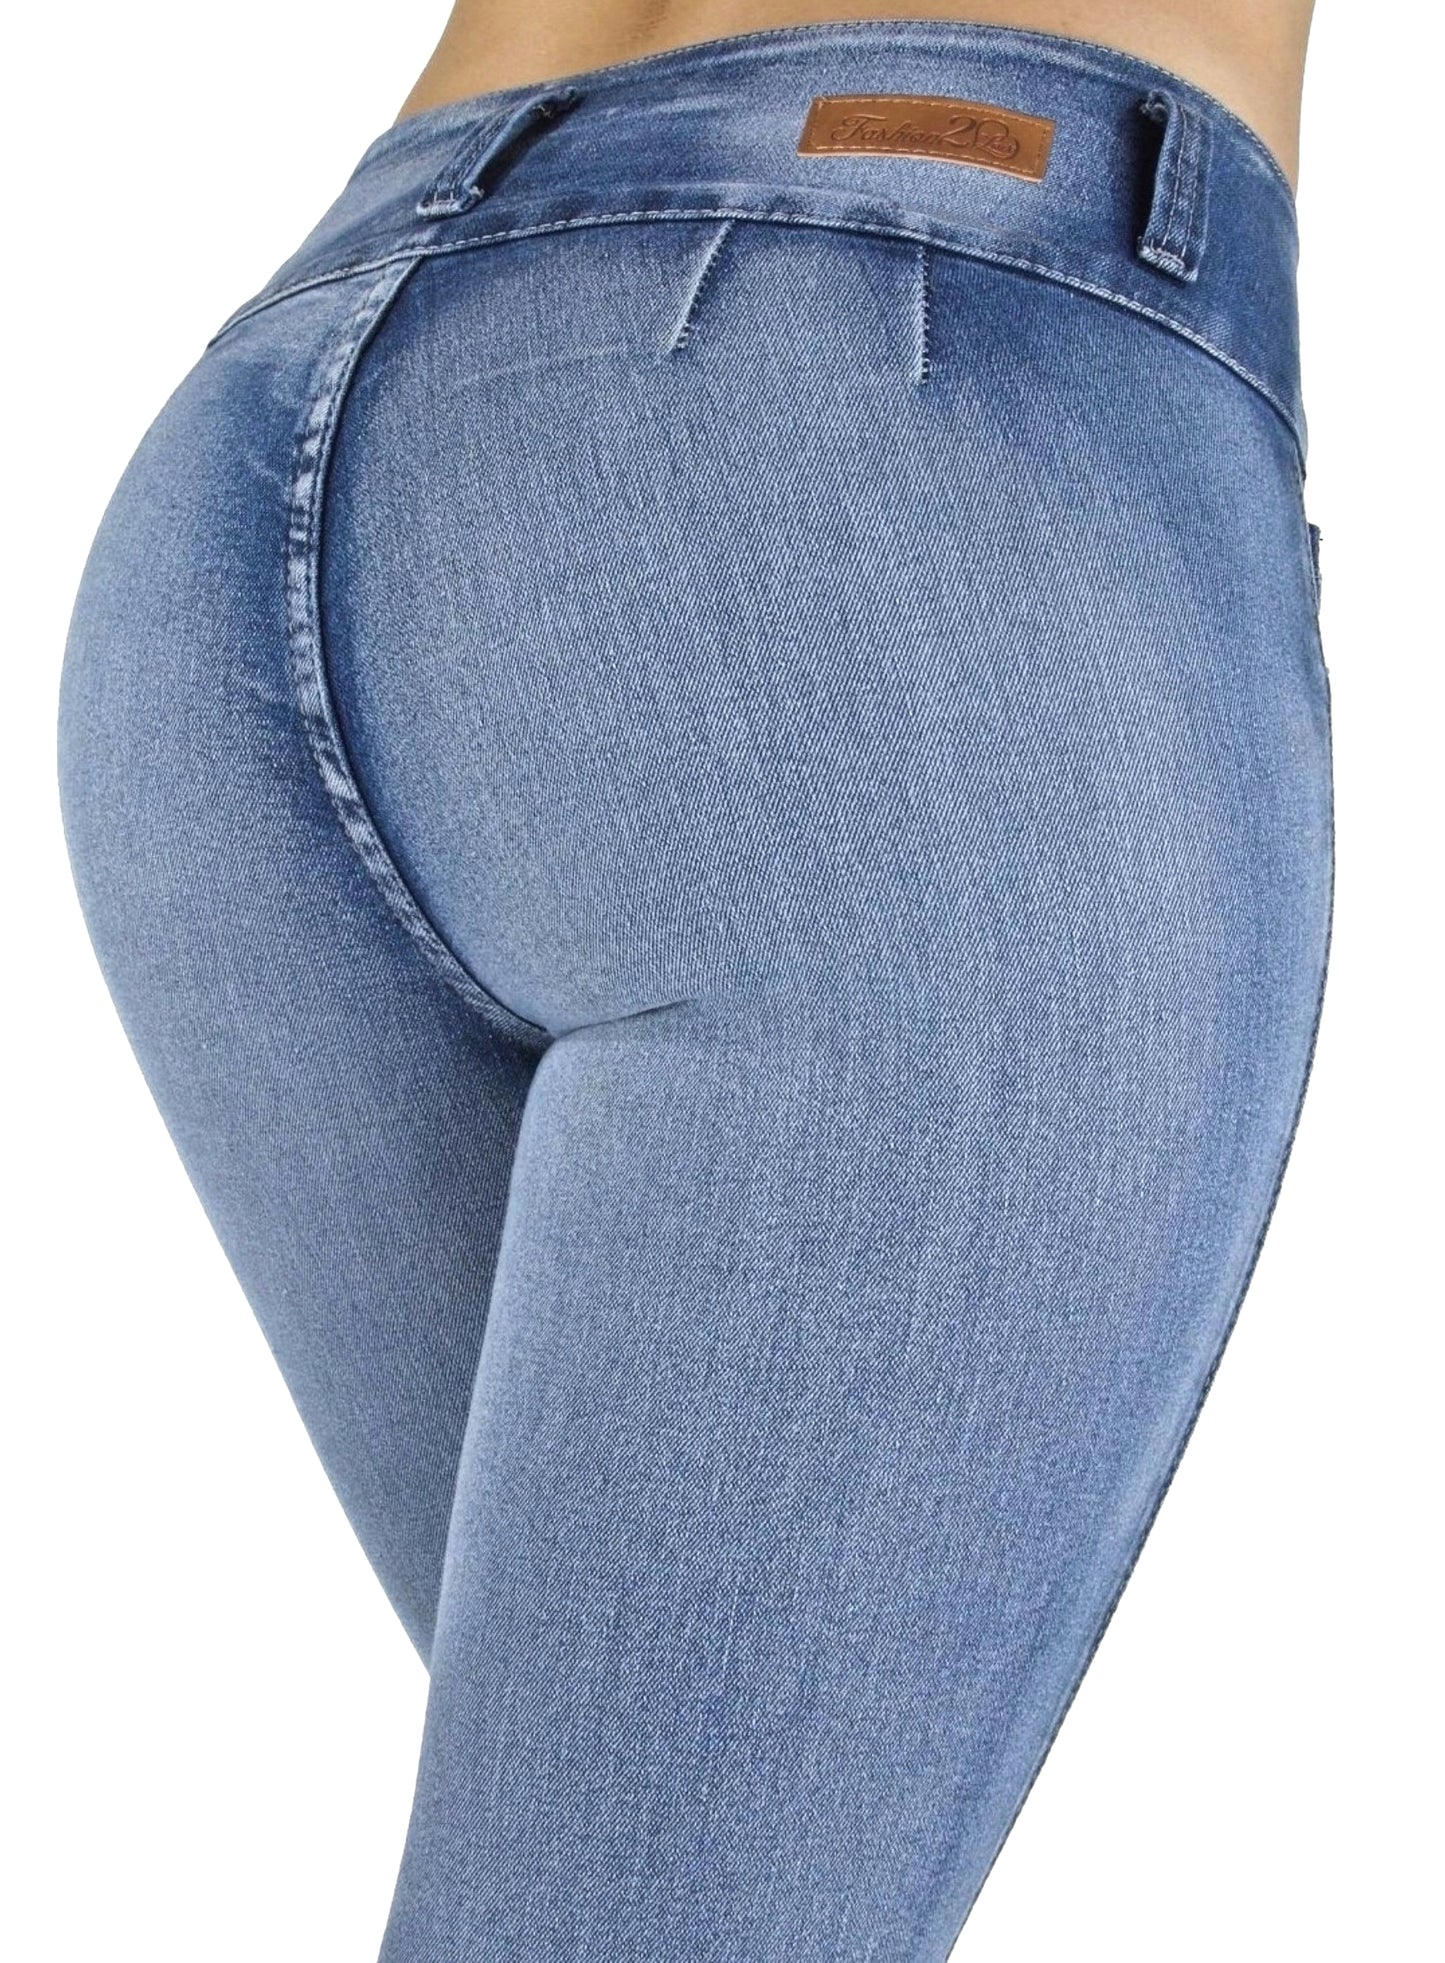 Revel Jeans Columbian Buttlifting Jeans US size 1-2